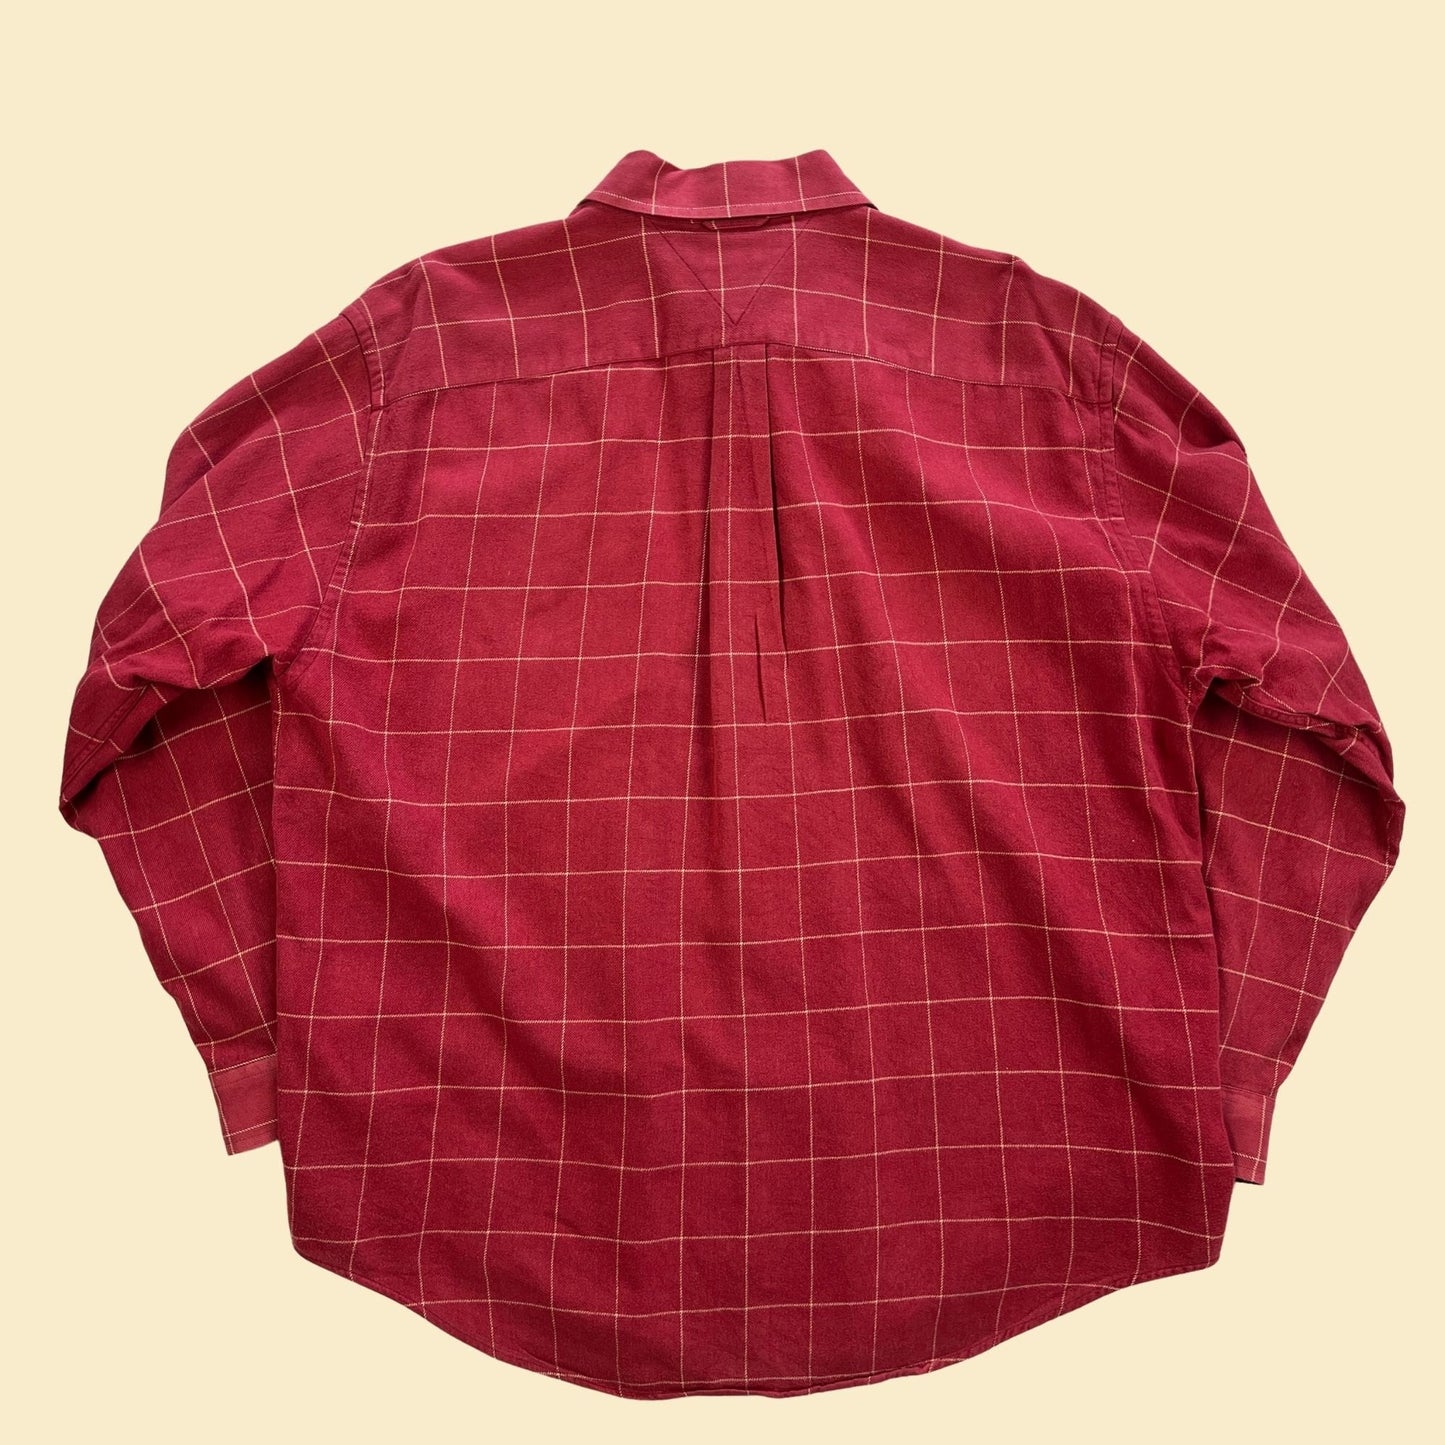 90s Tommy Hilfiger shirt in size XL, vintage 1990s red and beige geometric men's long sleeve button down